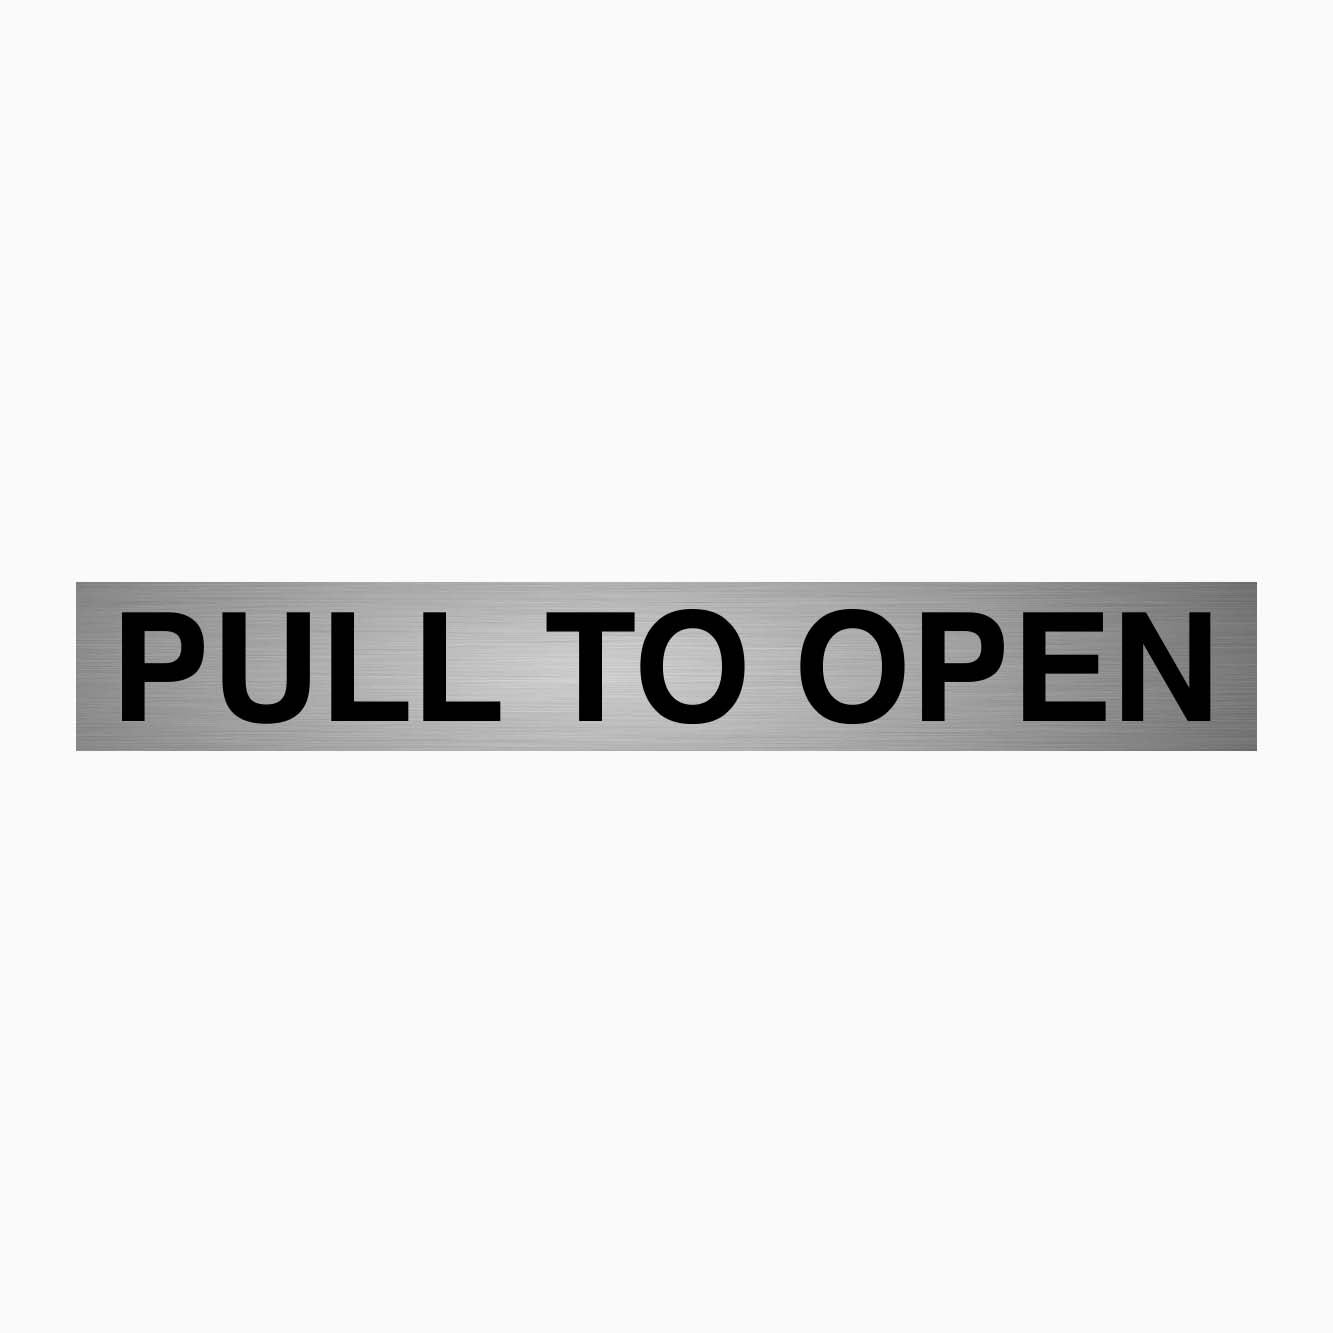 PULL TO OPEN SIGN - GET SIGNS - SILVER BACKGROUND